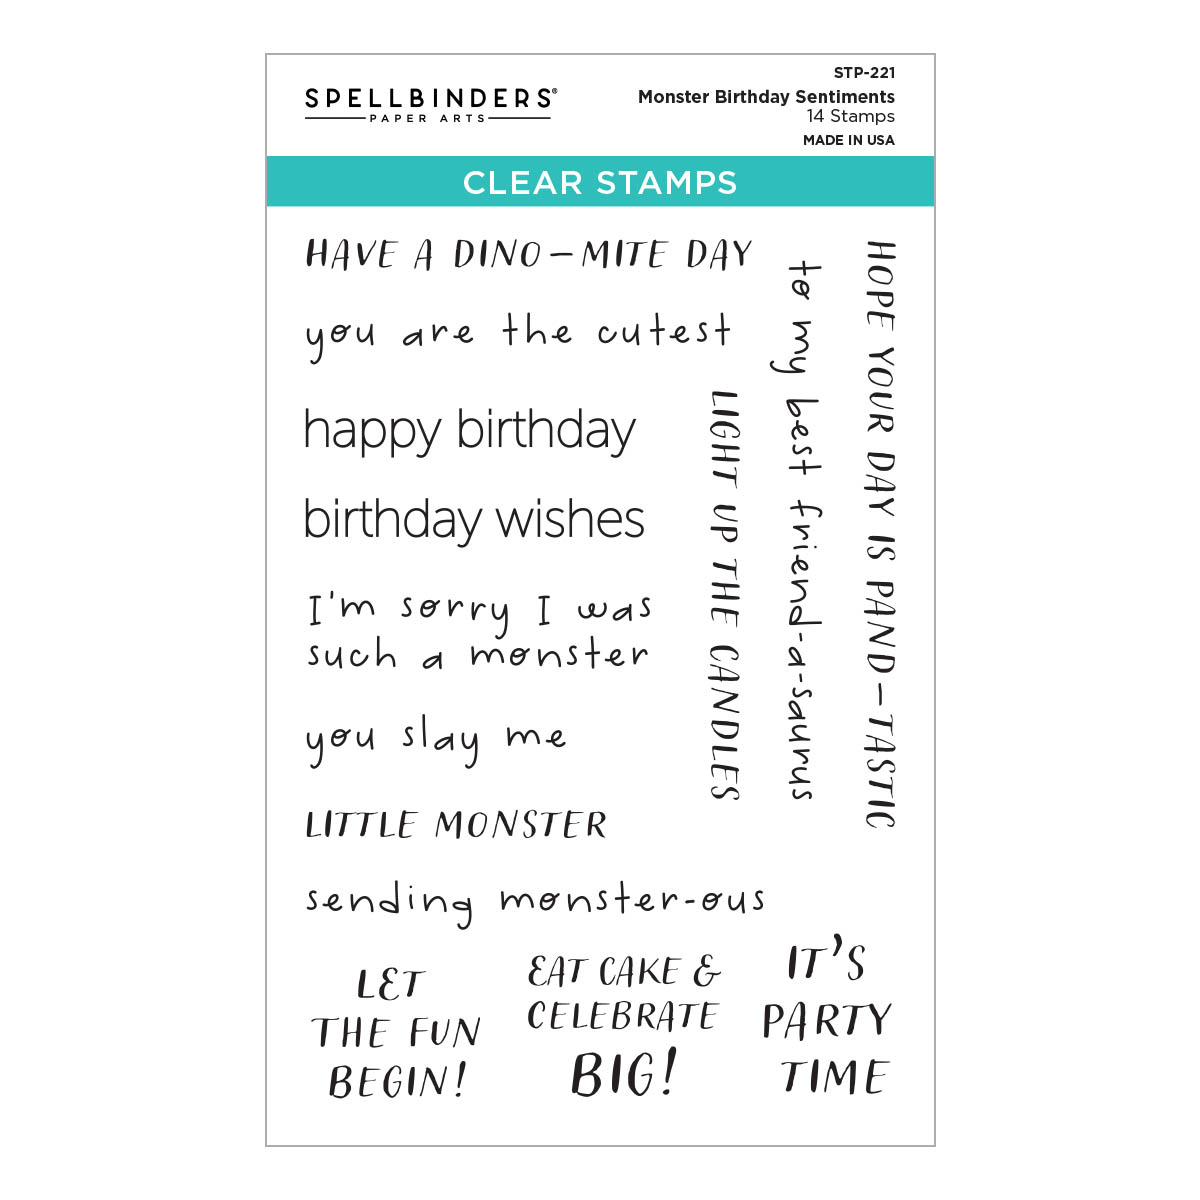 Spellbinders Monster Birthday Sentiments Clear Stamp Set From the Monster Birthday Collection